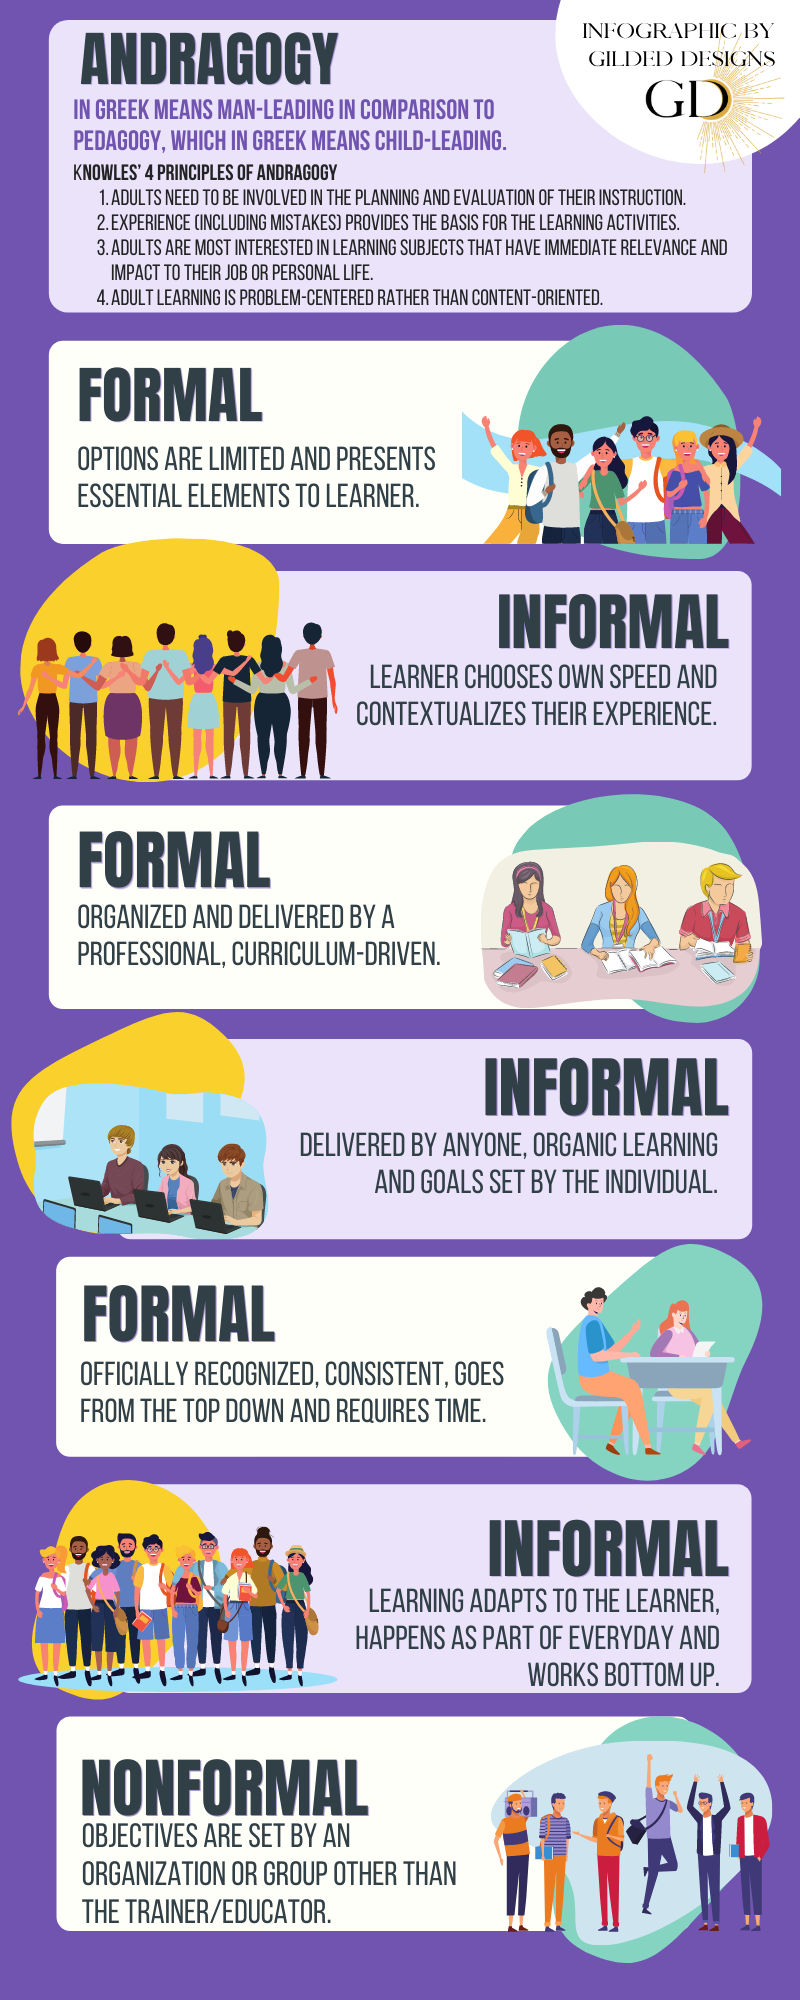 This is an infographic on Andragogy